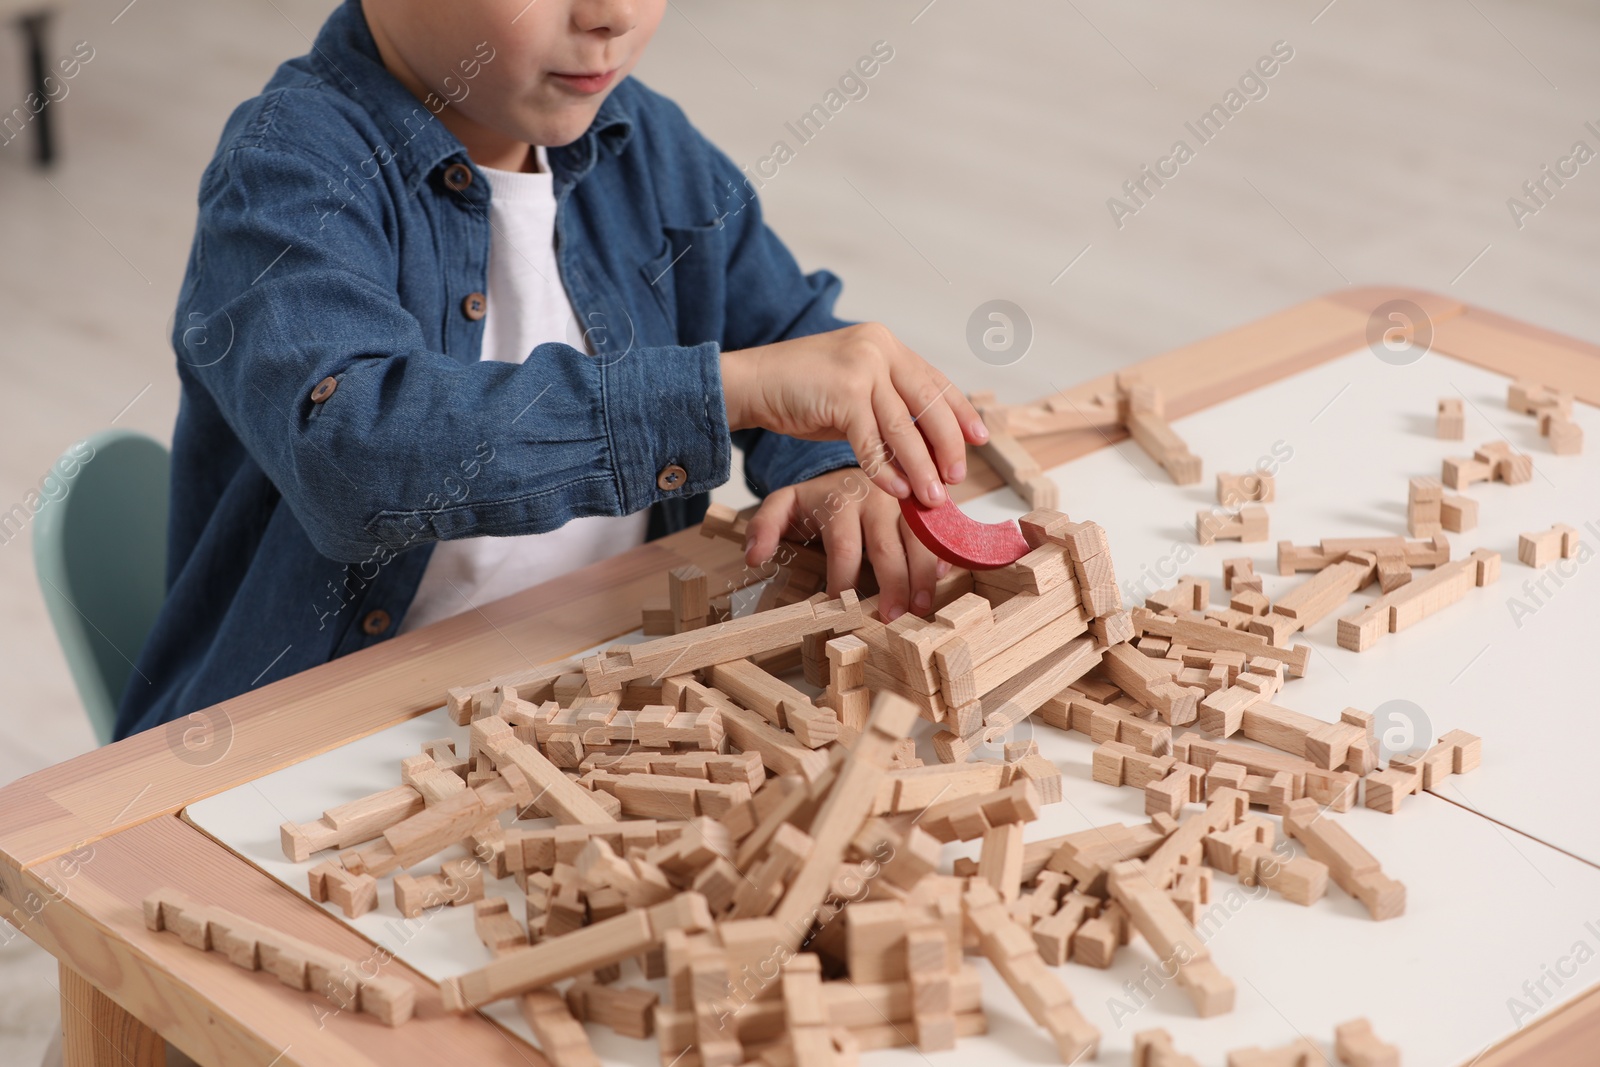 Photo of Little boy playing with wooden blocks at table indoors, closeup. Child's toy